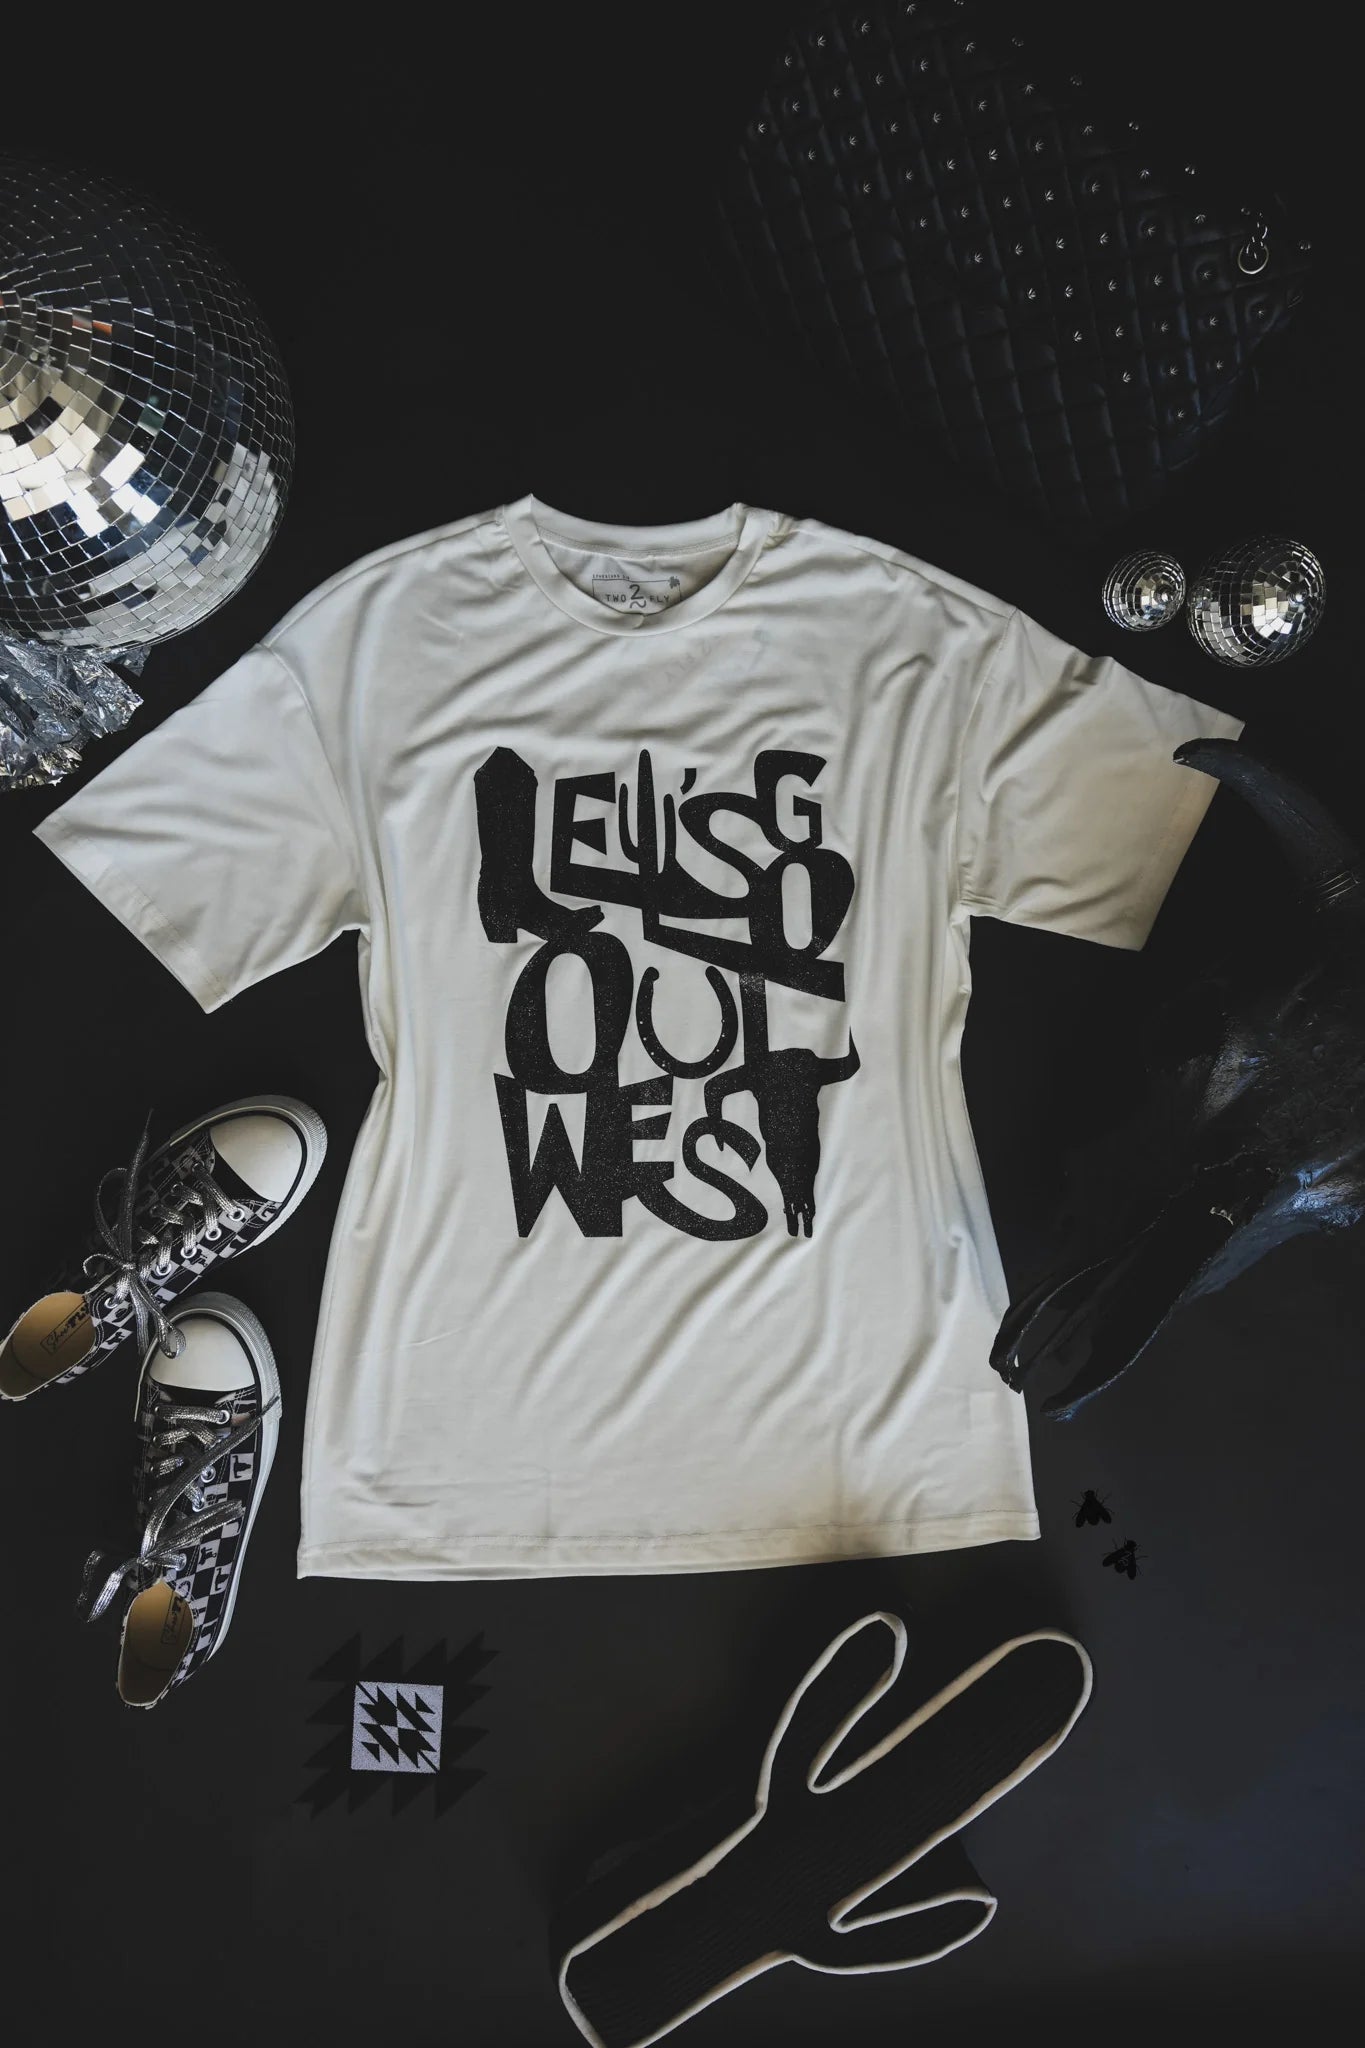 The Let's GO out West Top